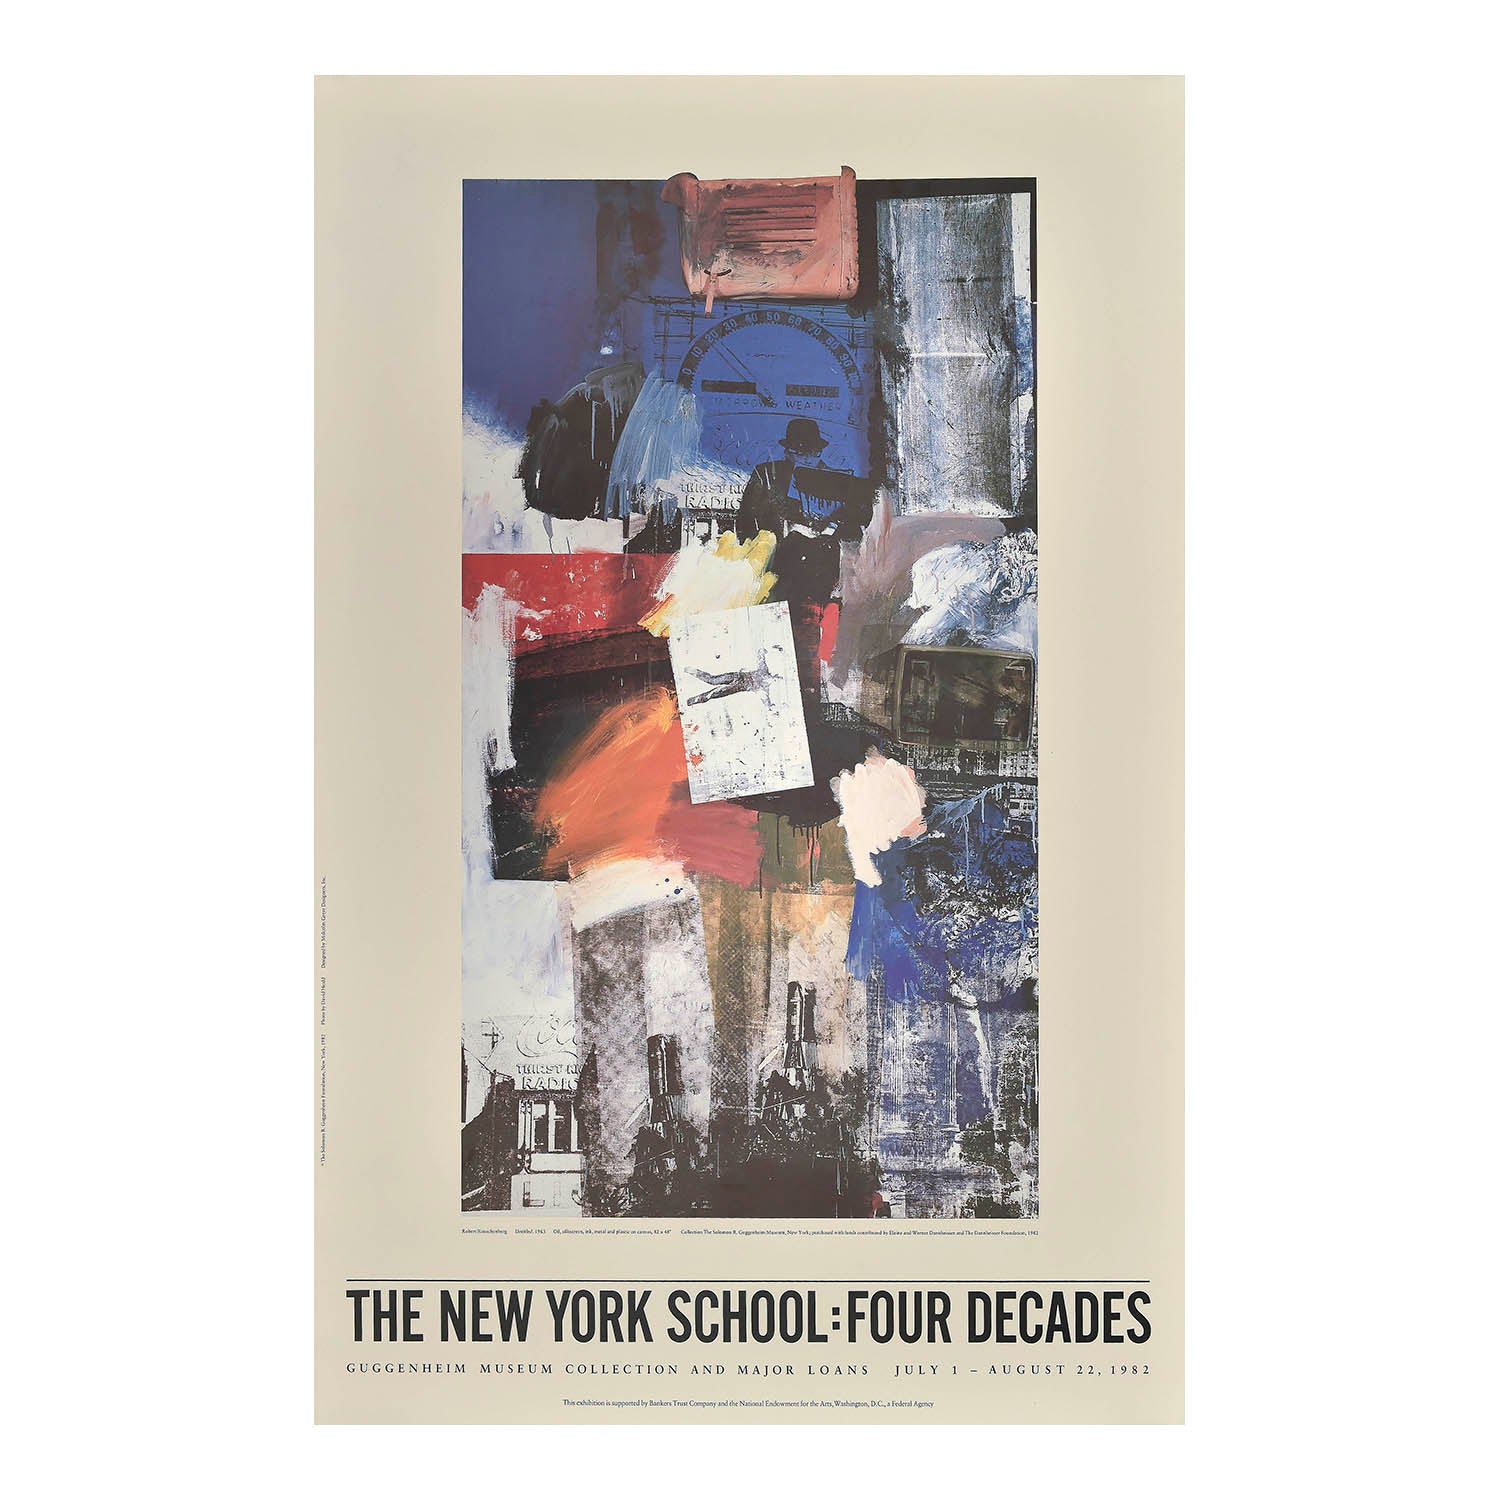 art exhibition poster, The New York School: Four Decades, Guggenheim Museum Collection, 1982. The design features Untitled (1963) by Robert Rauschenberg